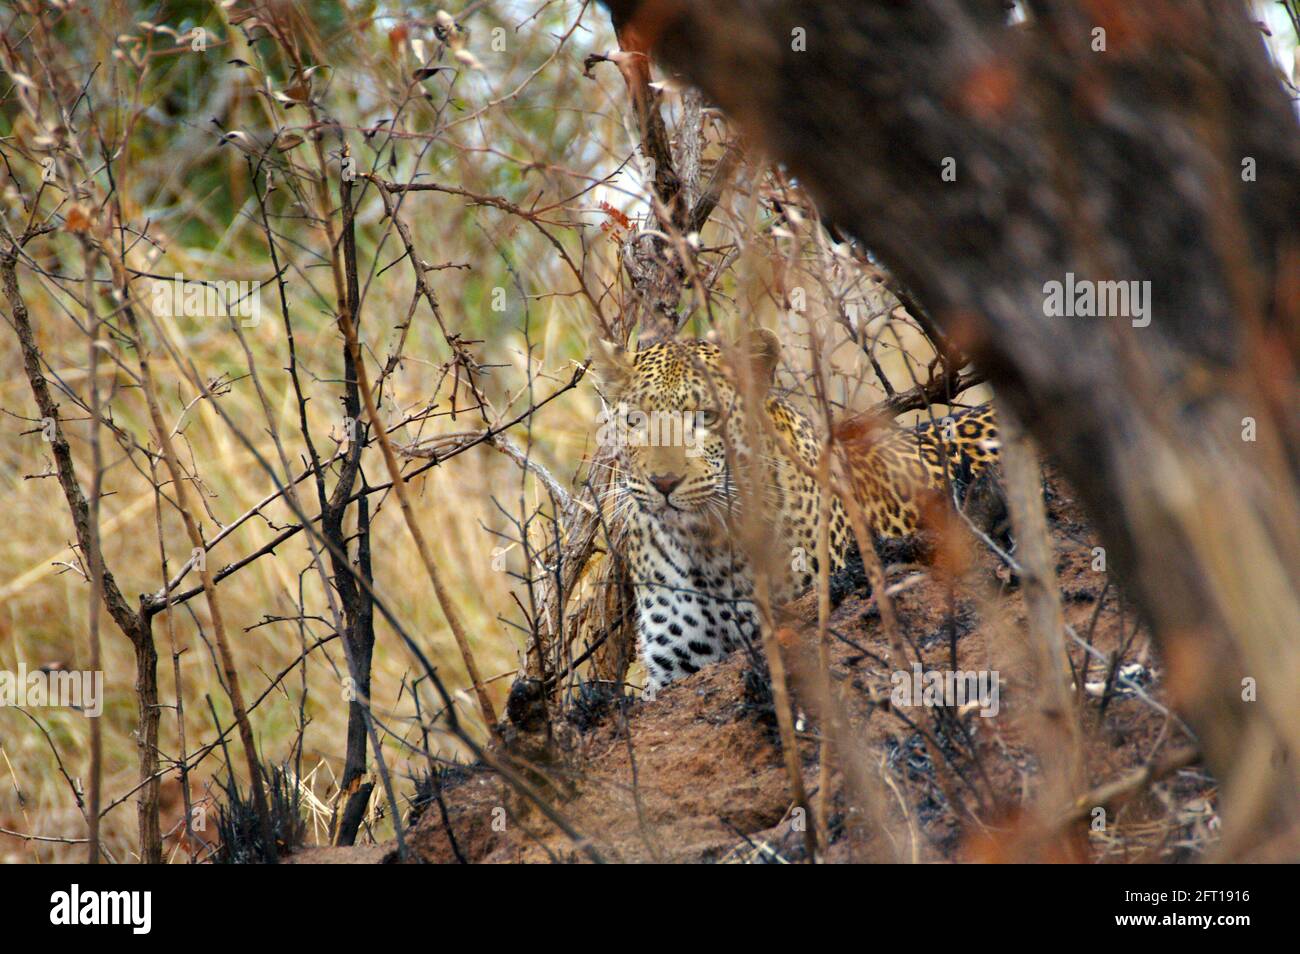 Leopard camouflaged in dry grasses Stock Photo